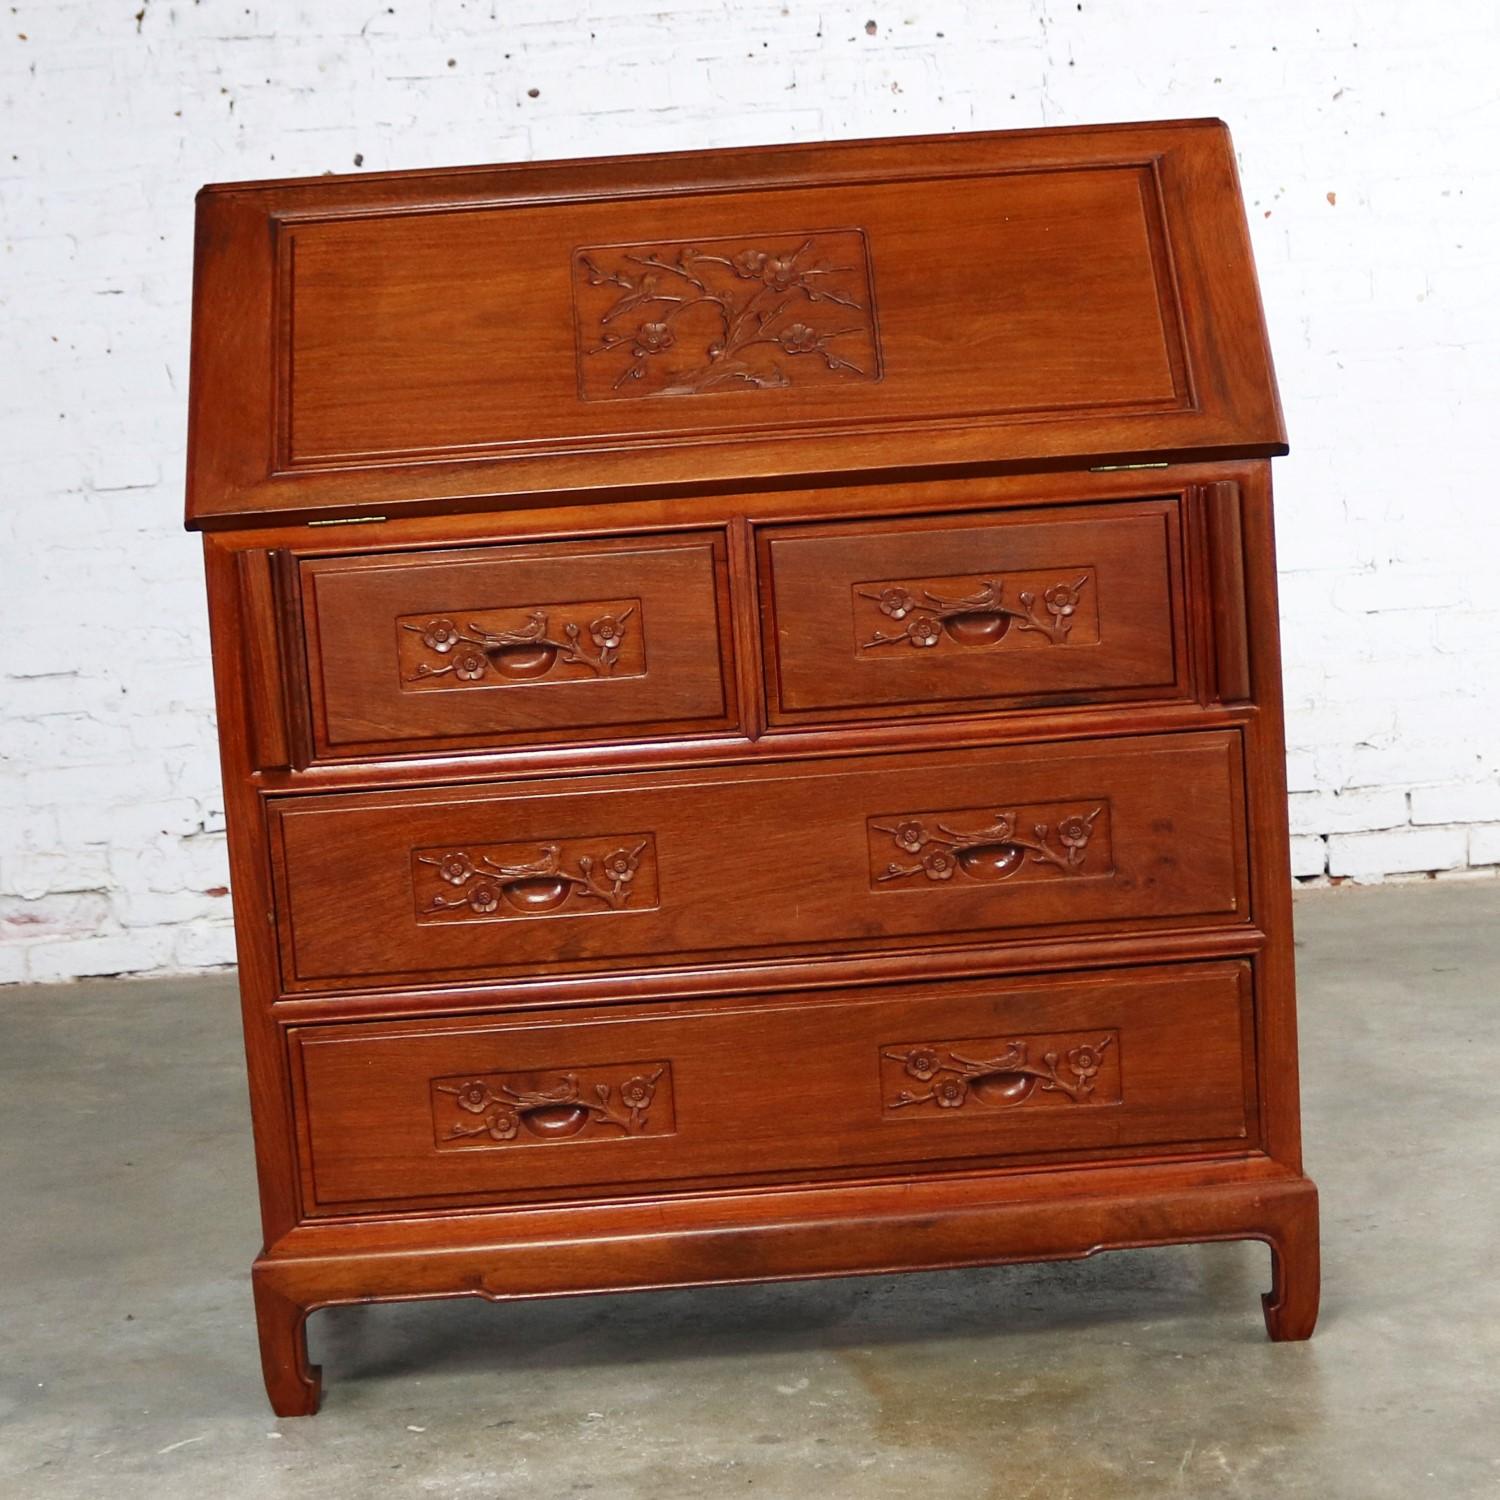 Chinese Asian Teak Hand Carved Drop Front Compartmentalized Desk Style of George Zee For Sale